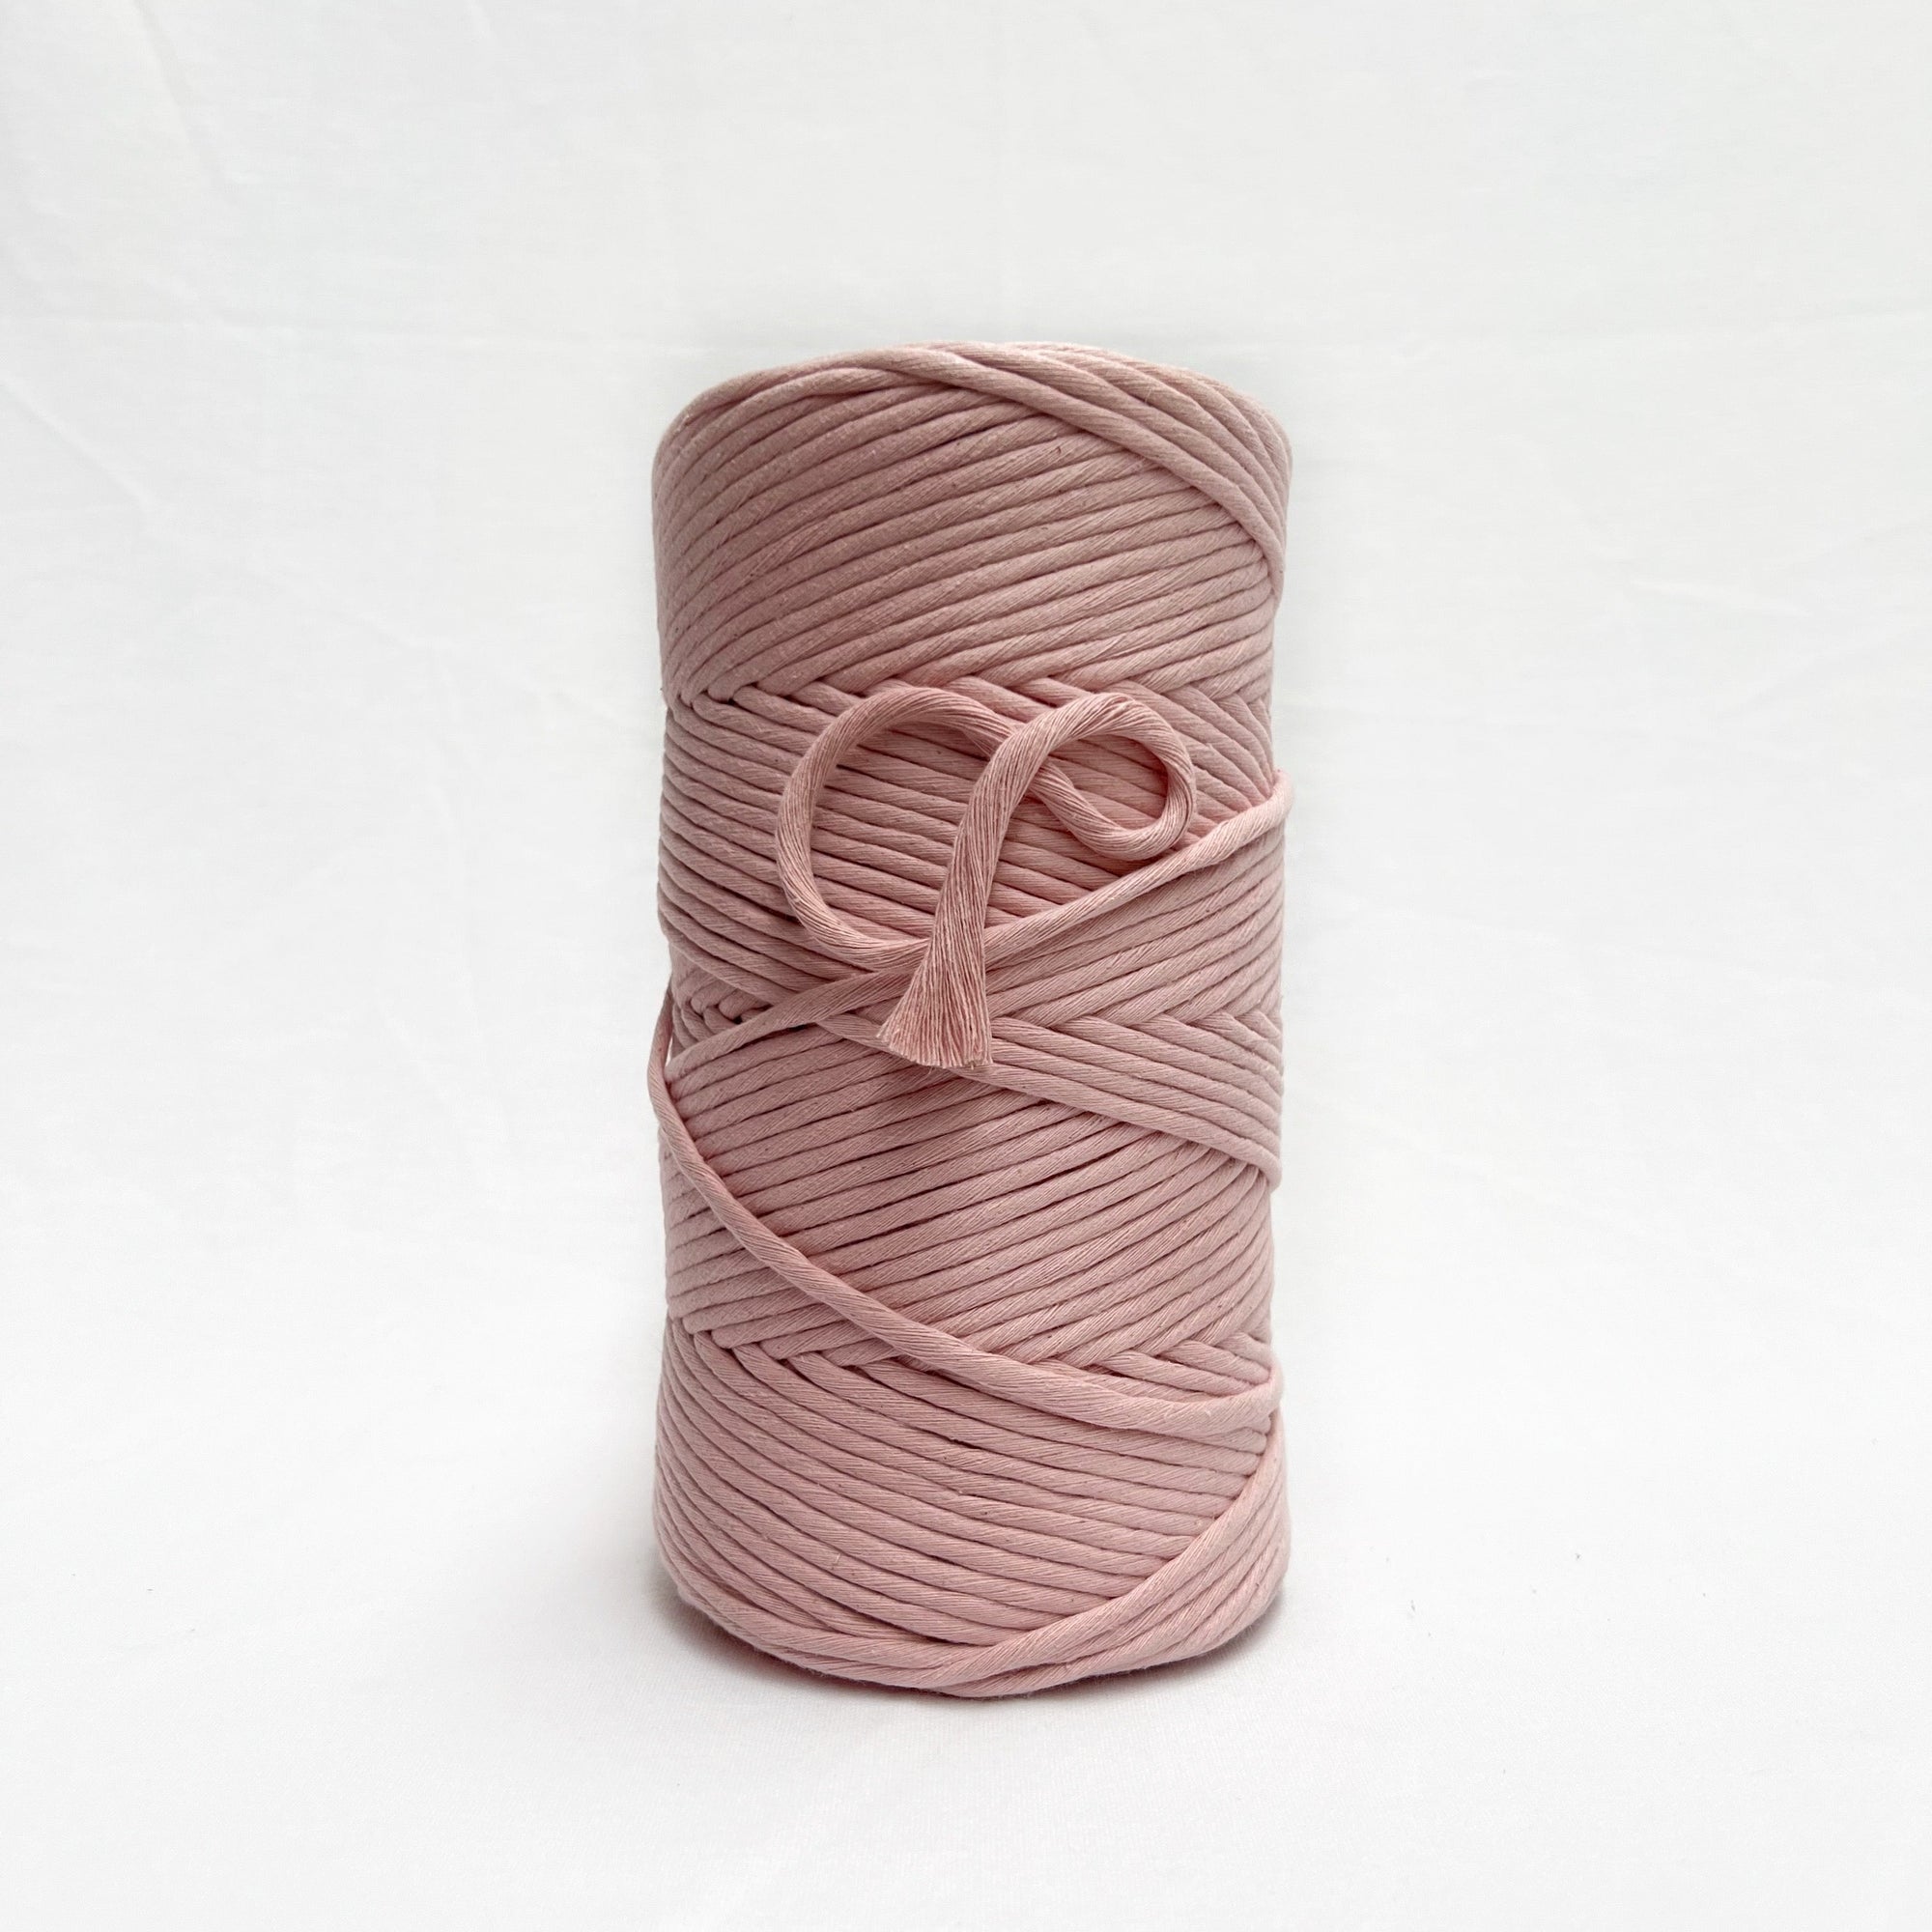 mary maker studio 1kg 5mm recycled cotton macrame string in crisp cherry blossom pink colour suitable for macrame workshops beginners and advanced artists